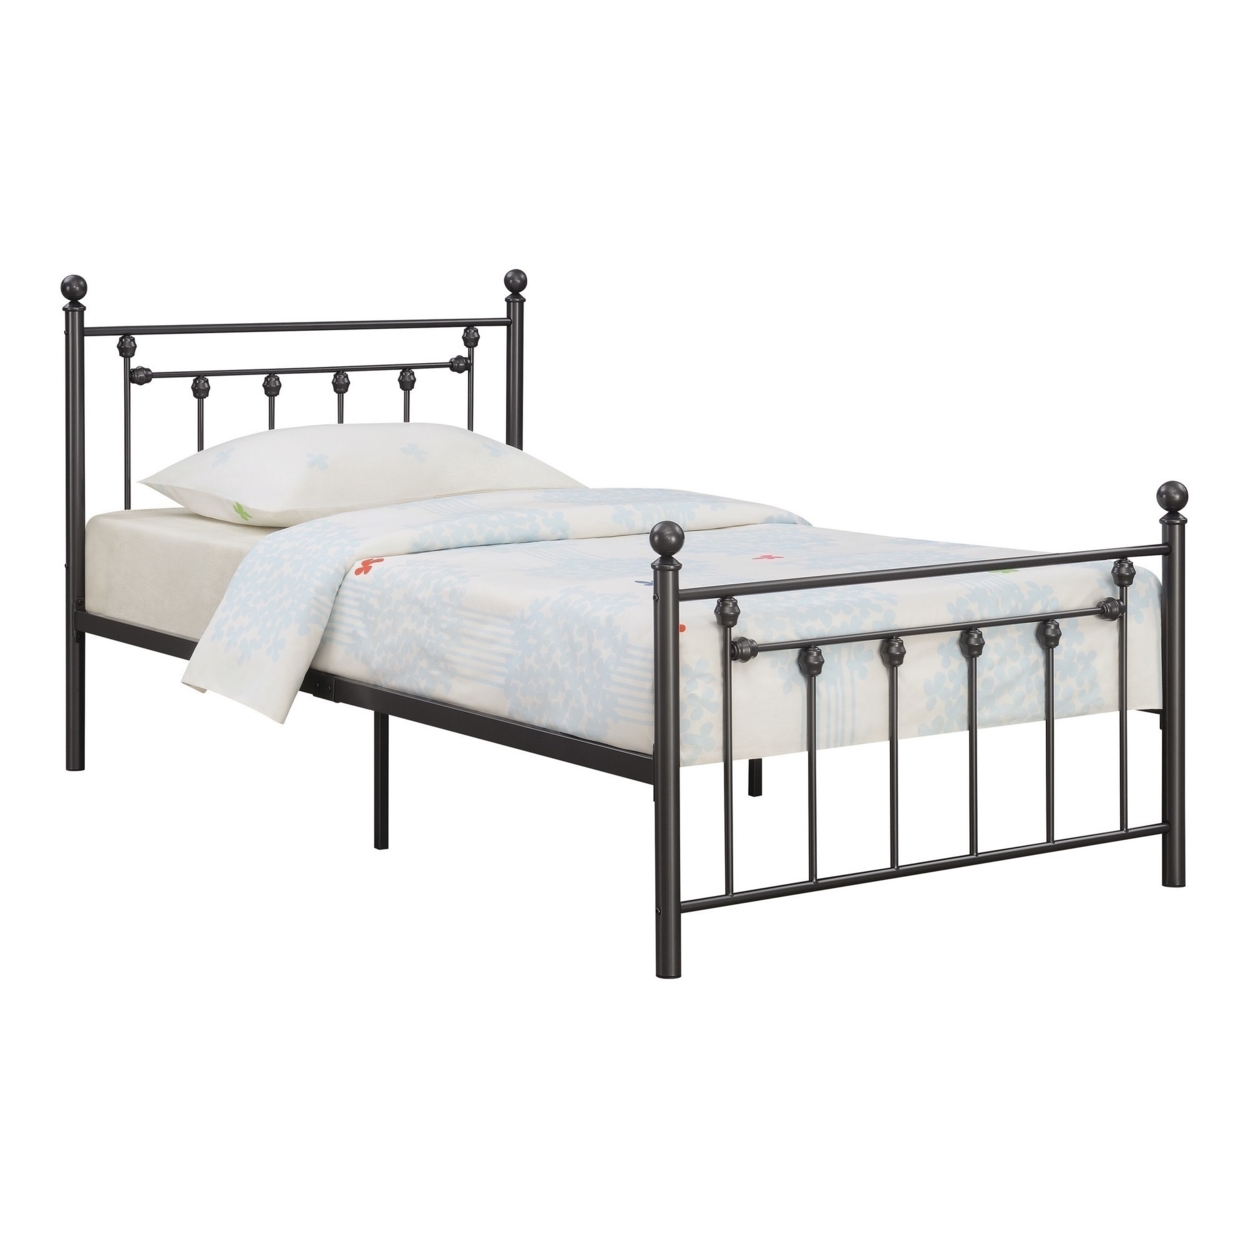 Dio 79 Inch Metal Full Size Bed Frame, Spindle Design, Finial Posts, Black